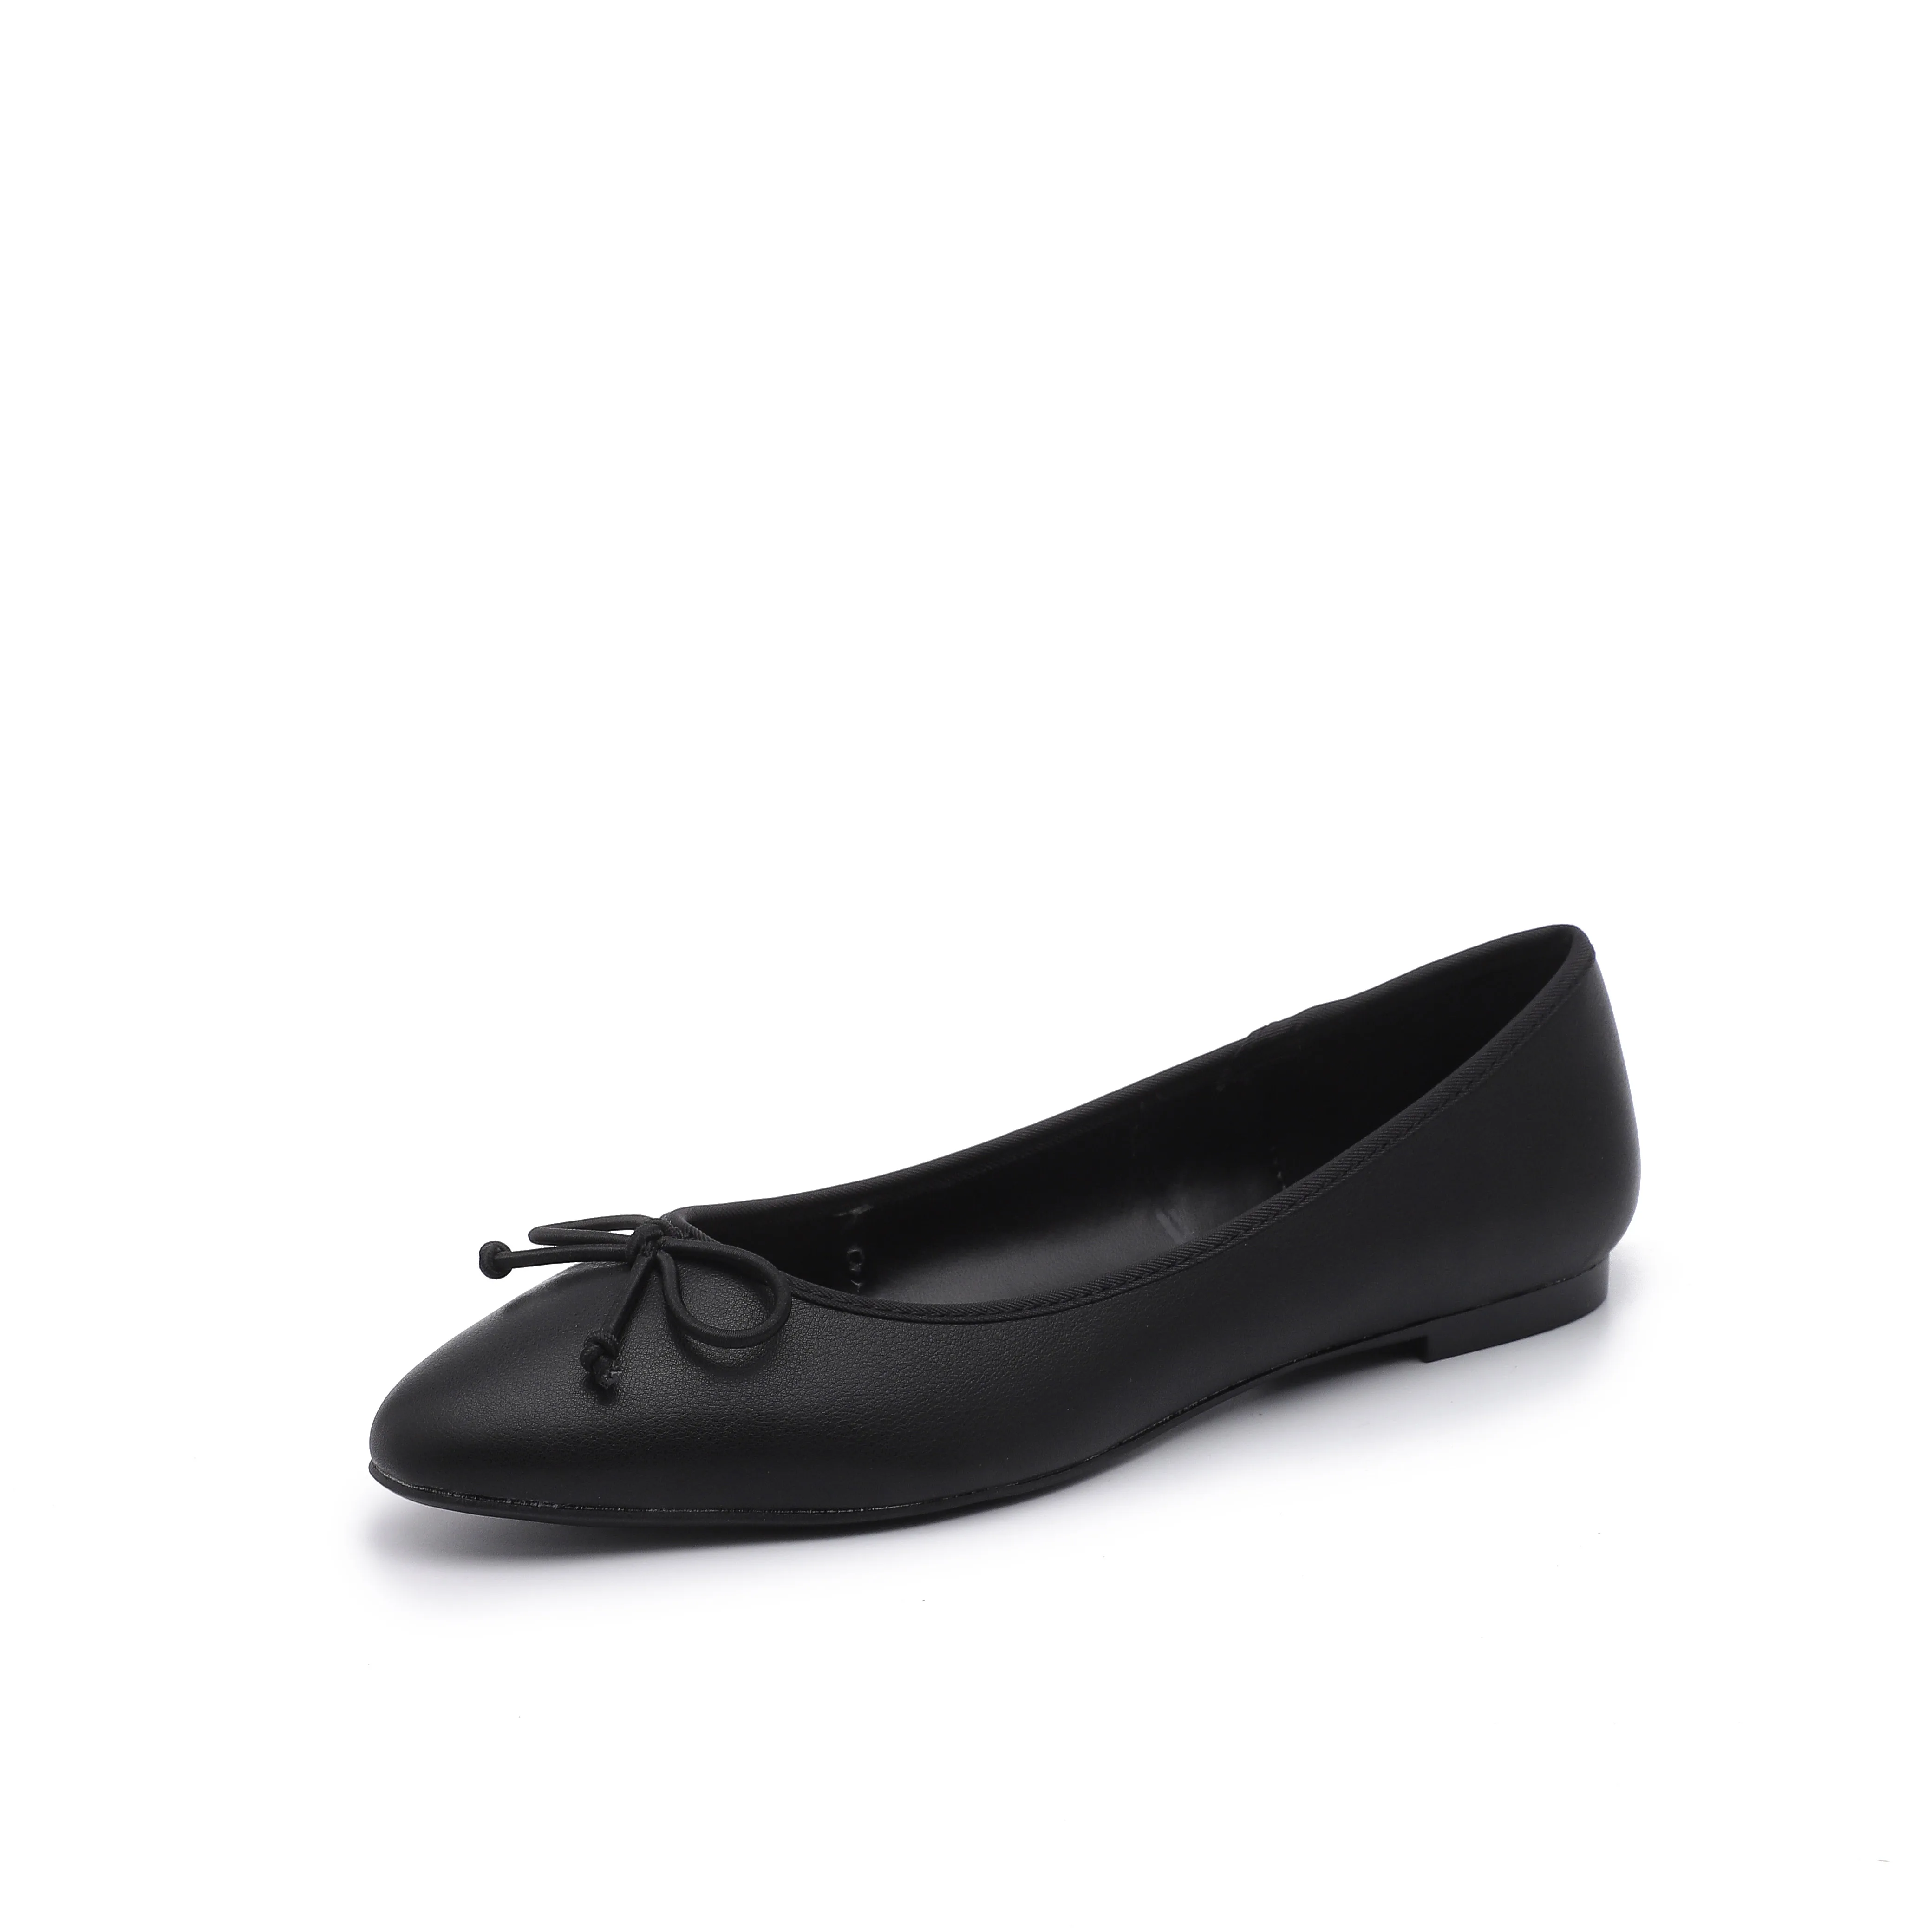 

1 Pair Women's Spark Desiree Ballet Flat - Ladies Flats with Concealed Orthotic Arch Support, Black